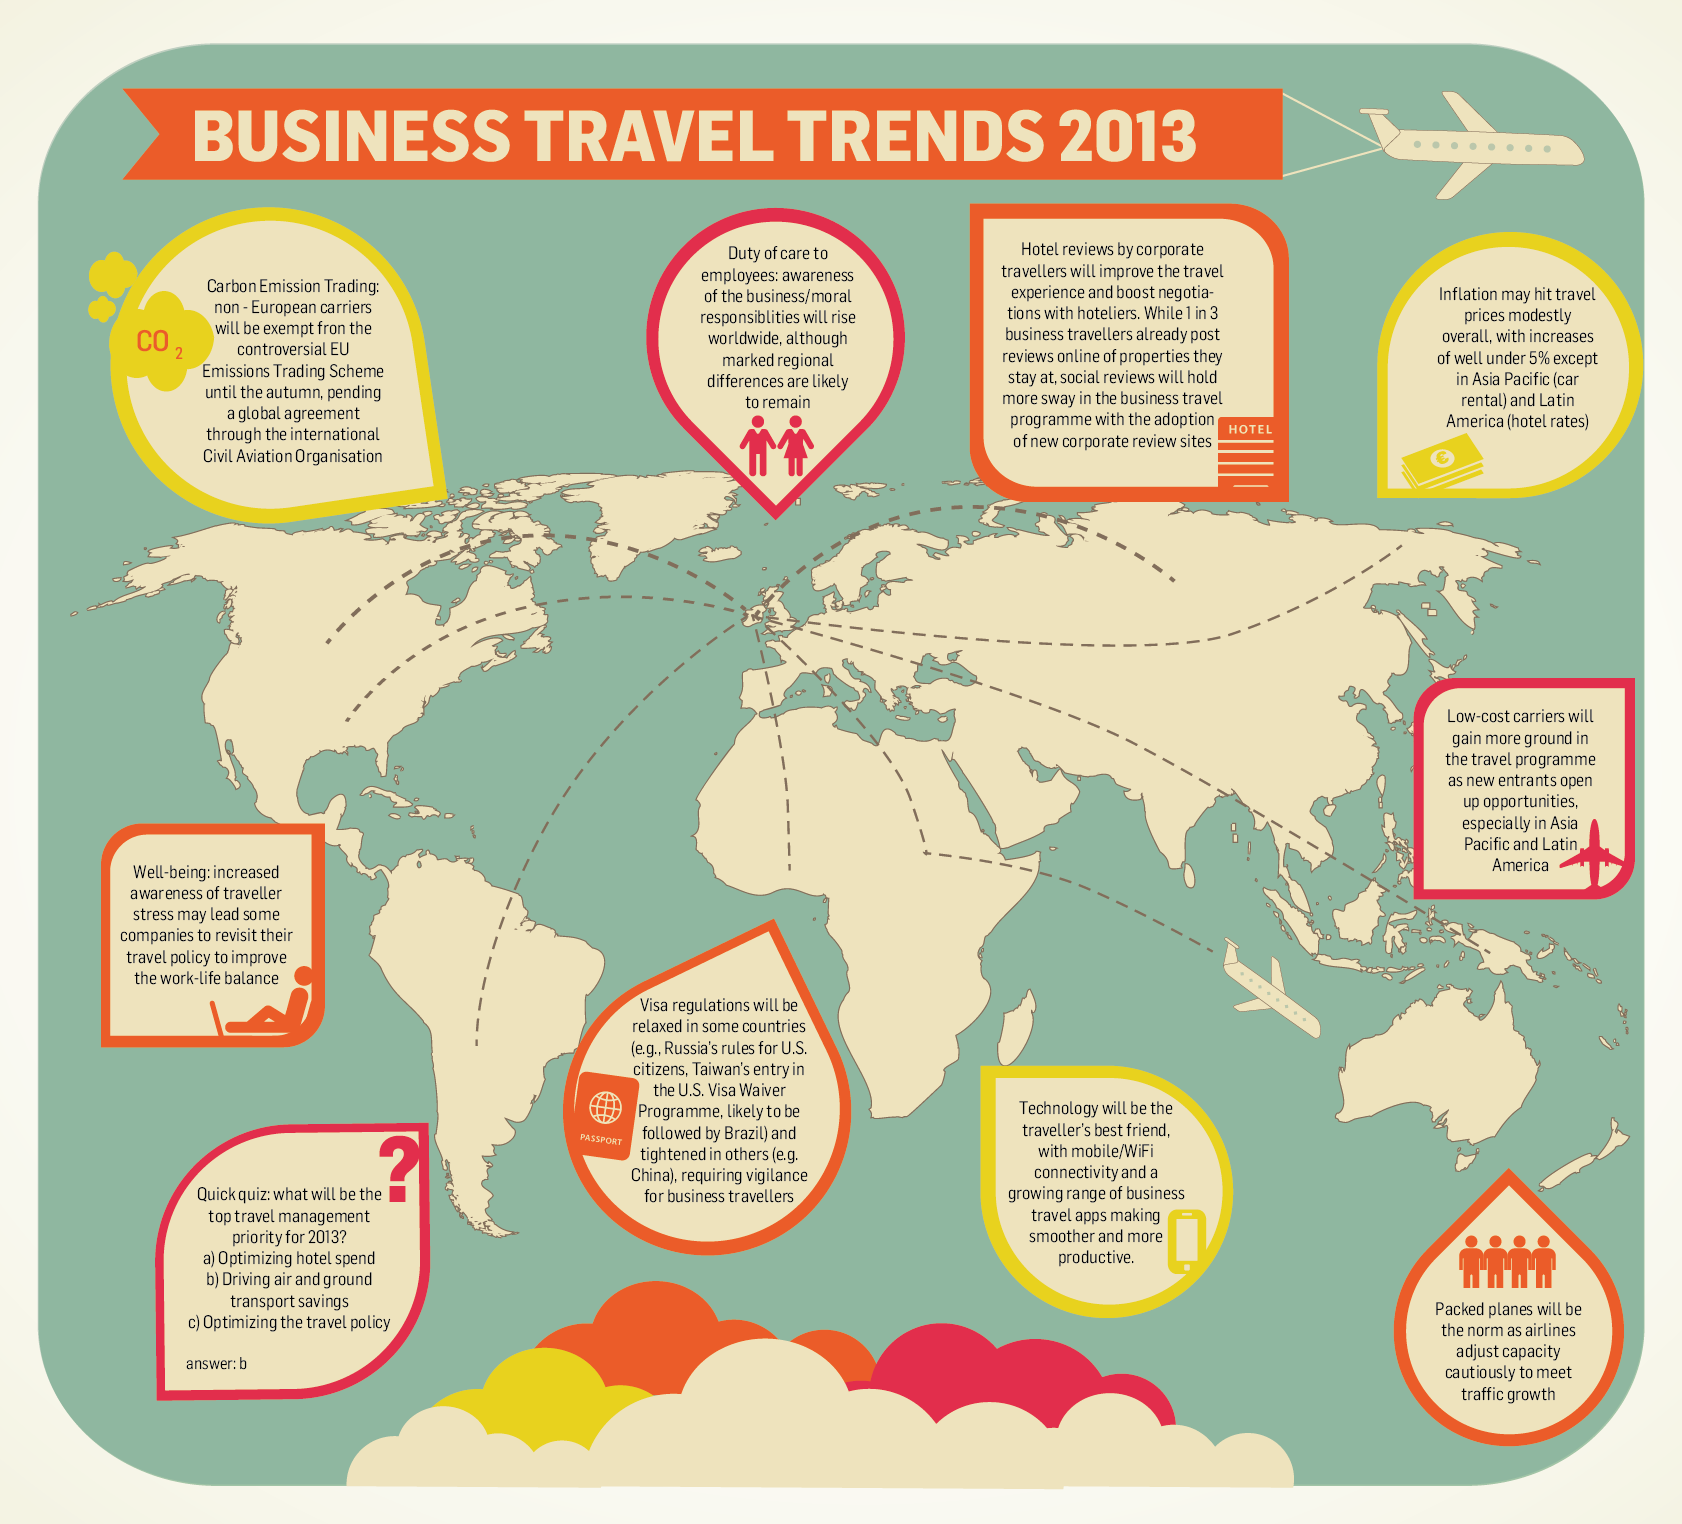 Business travel trends 2013 | Visual.ly